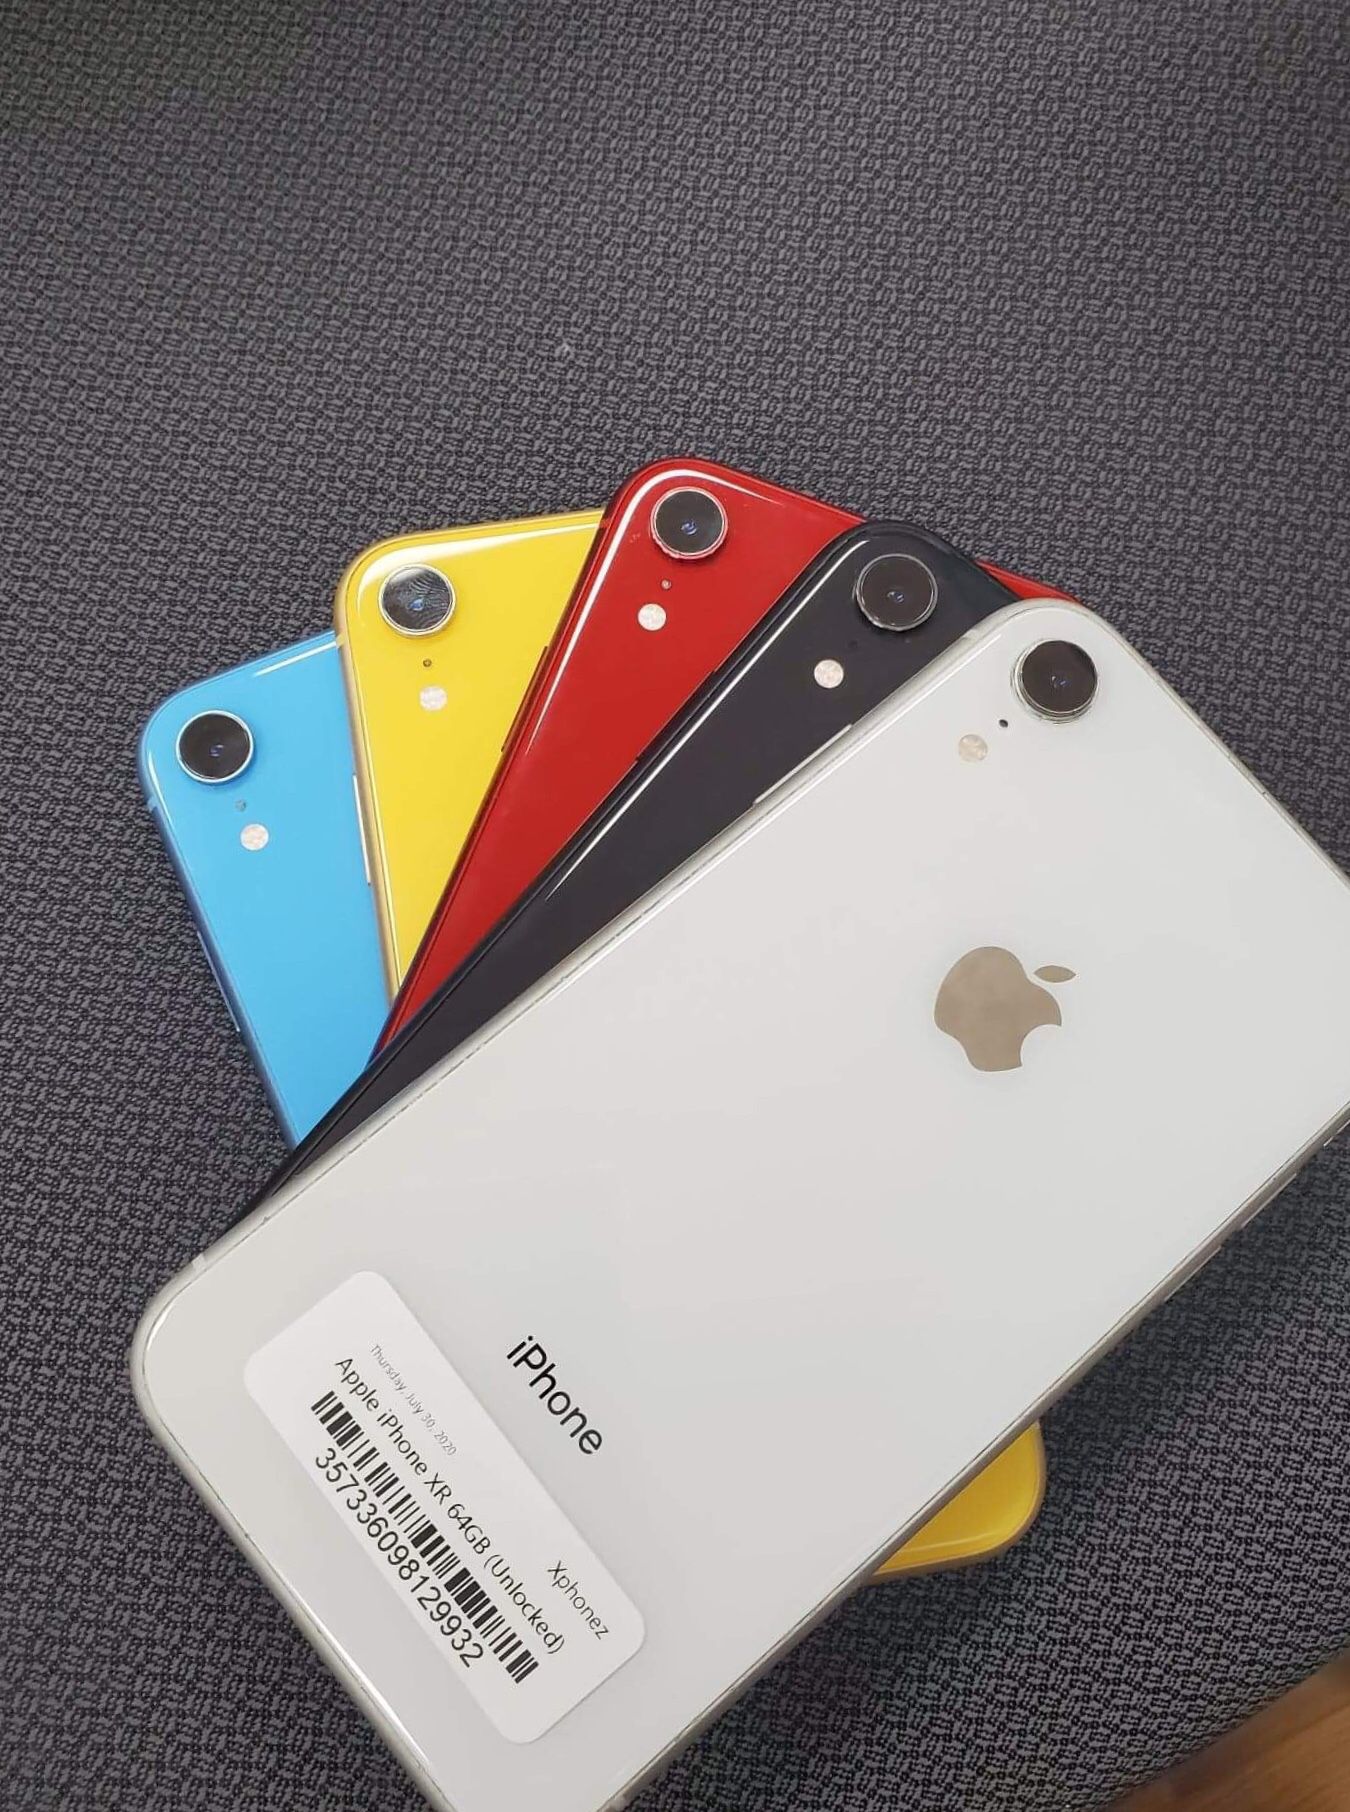 iPhone XR Unlocked Like New Condition With 30 Days Warranty